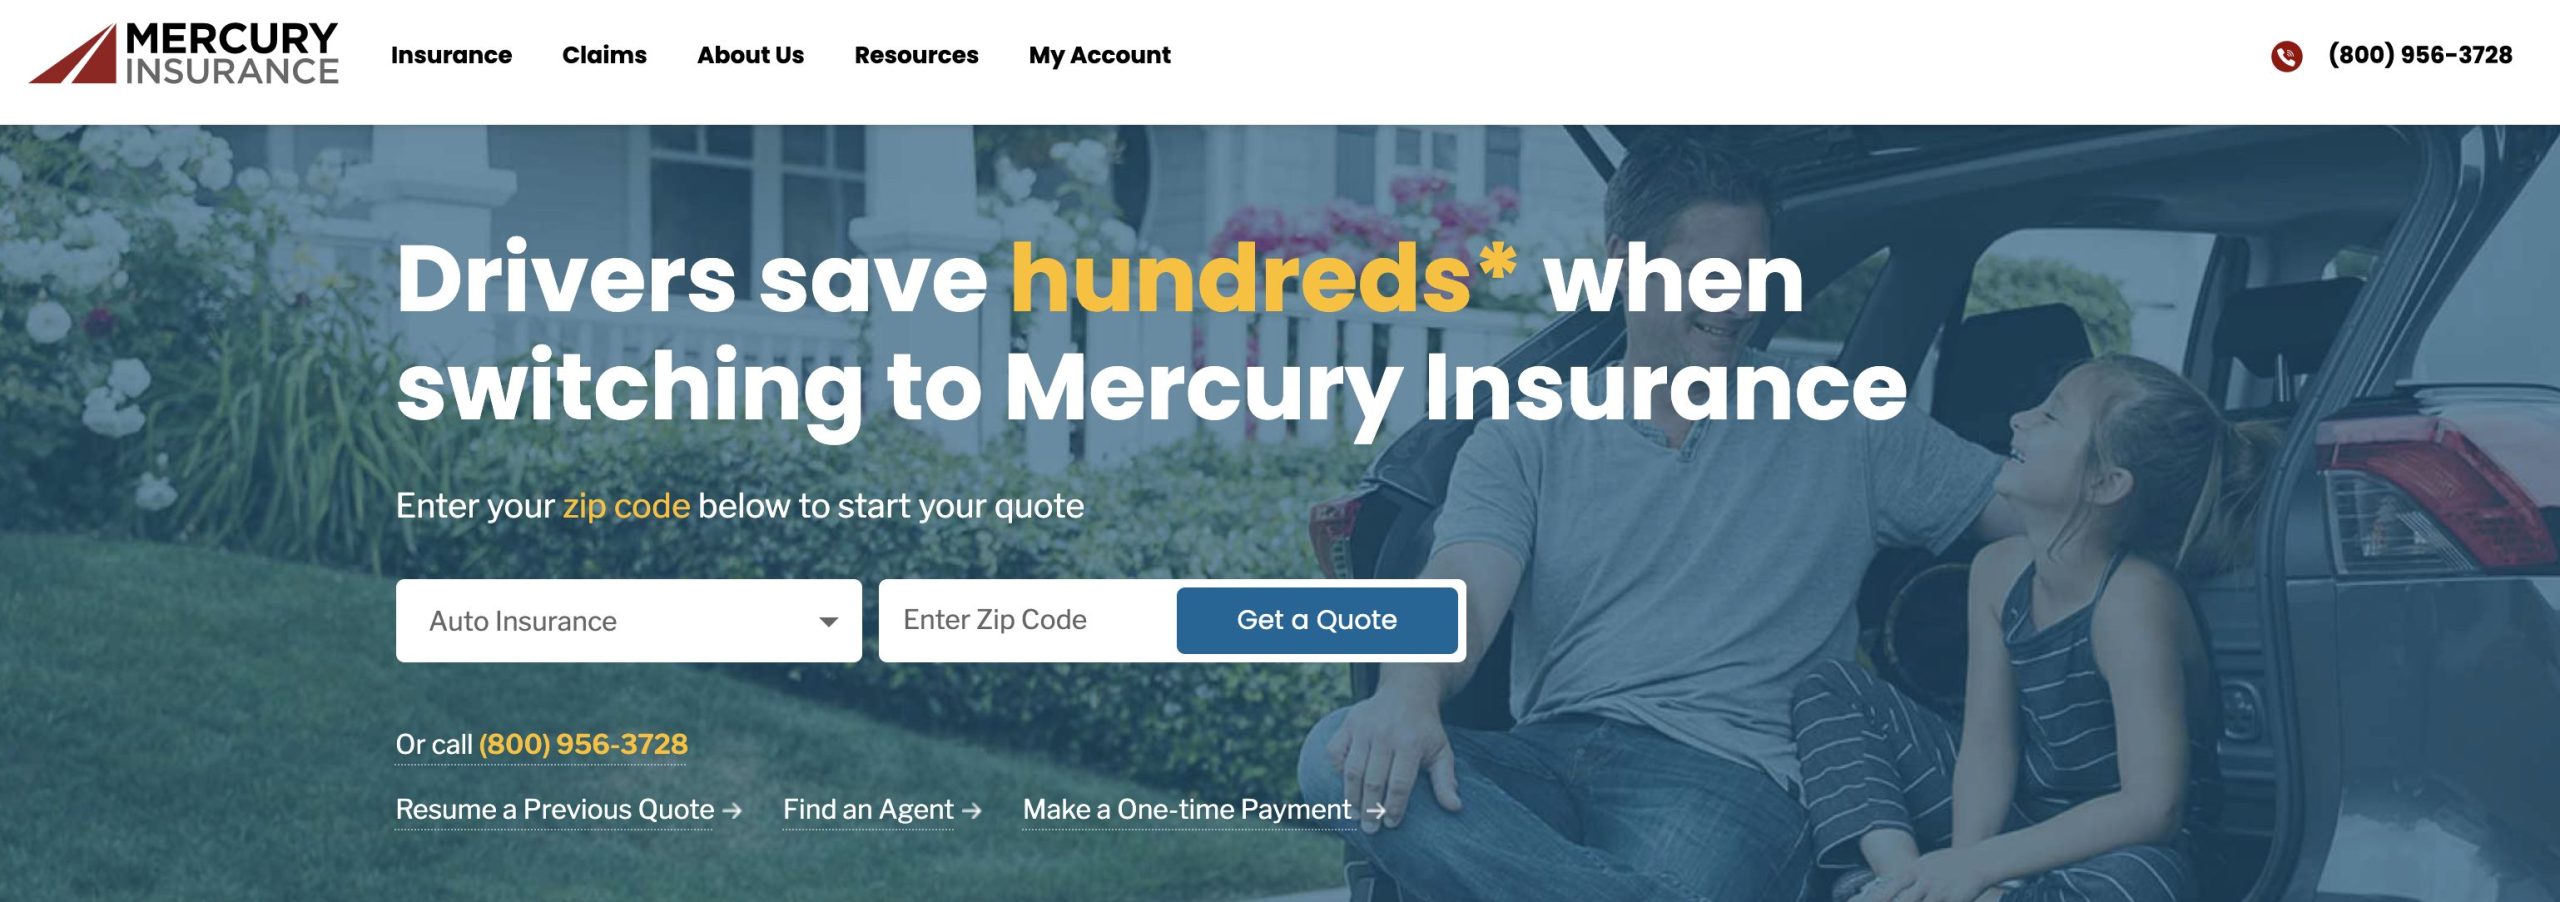  Mercury Insurance offers new coverages and discounts in Texas